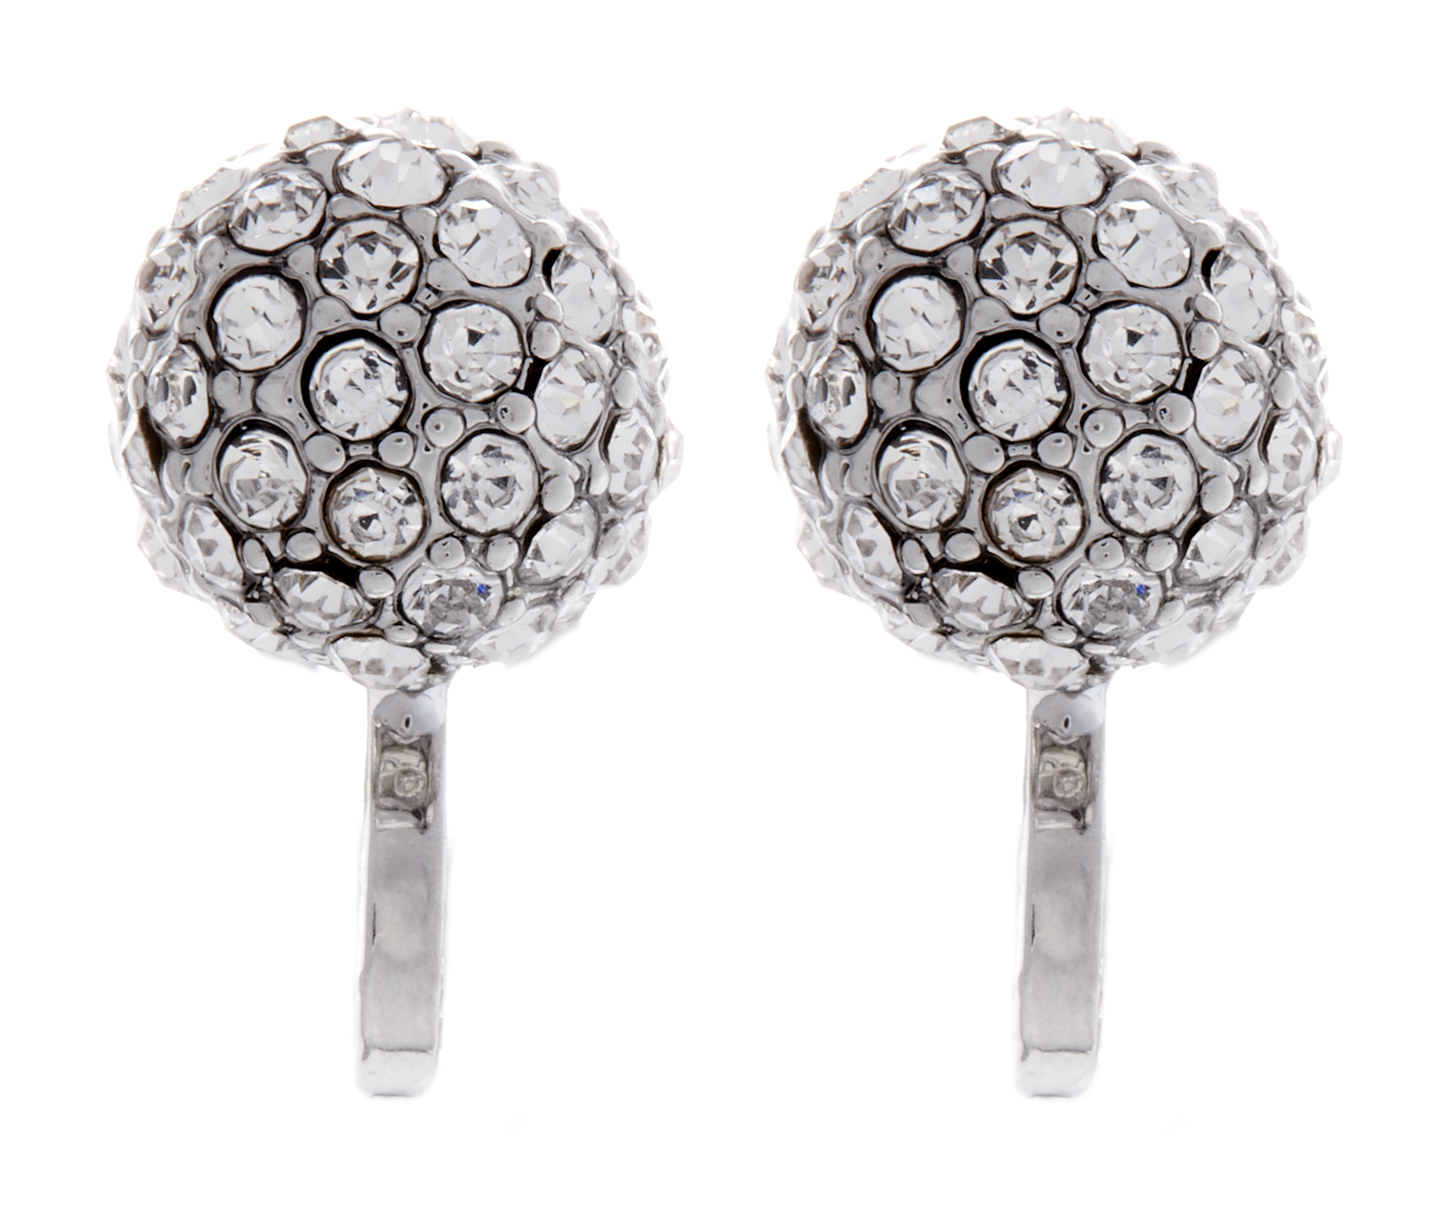 Clip On Earrings - Ada - silver ball earring with clear crystals